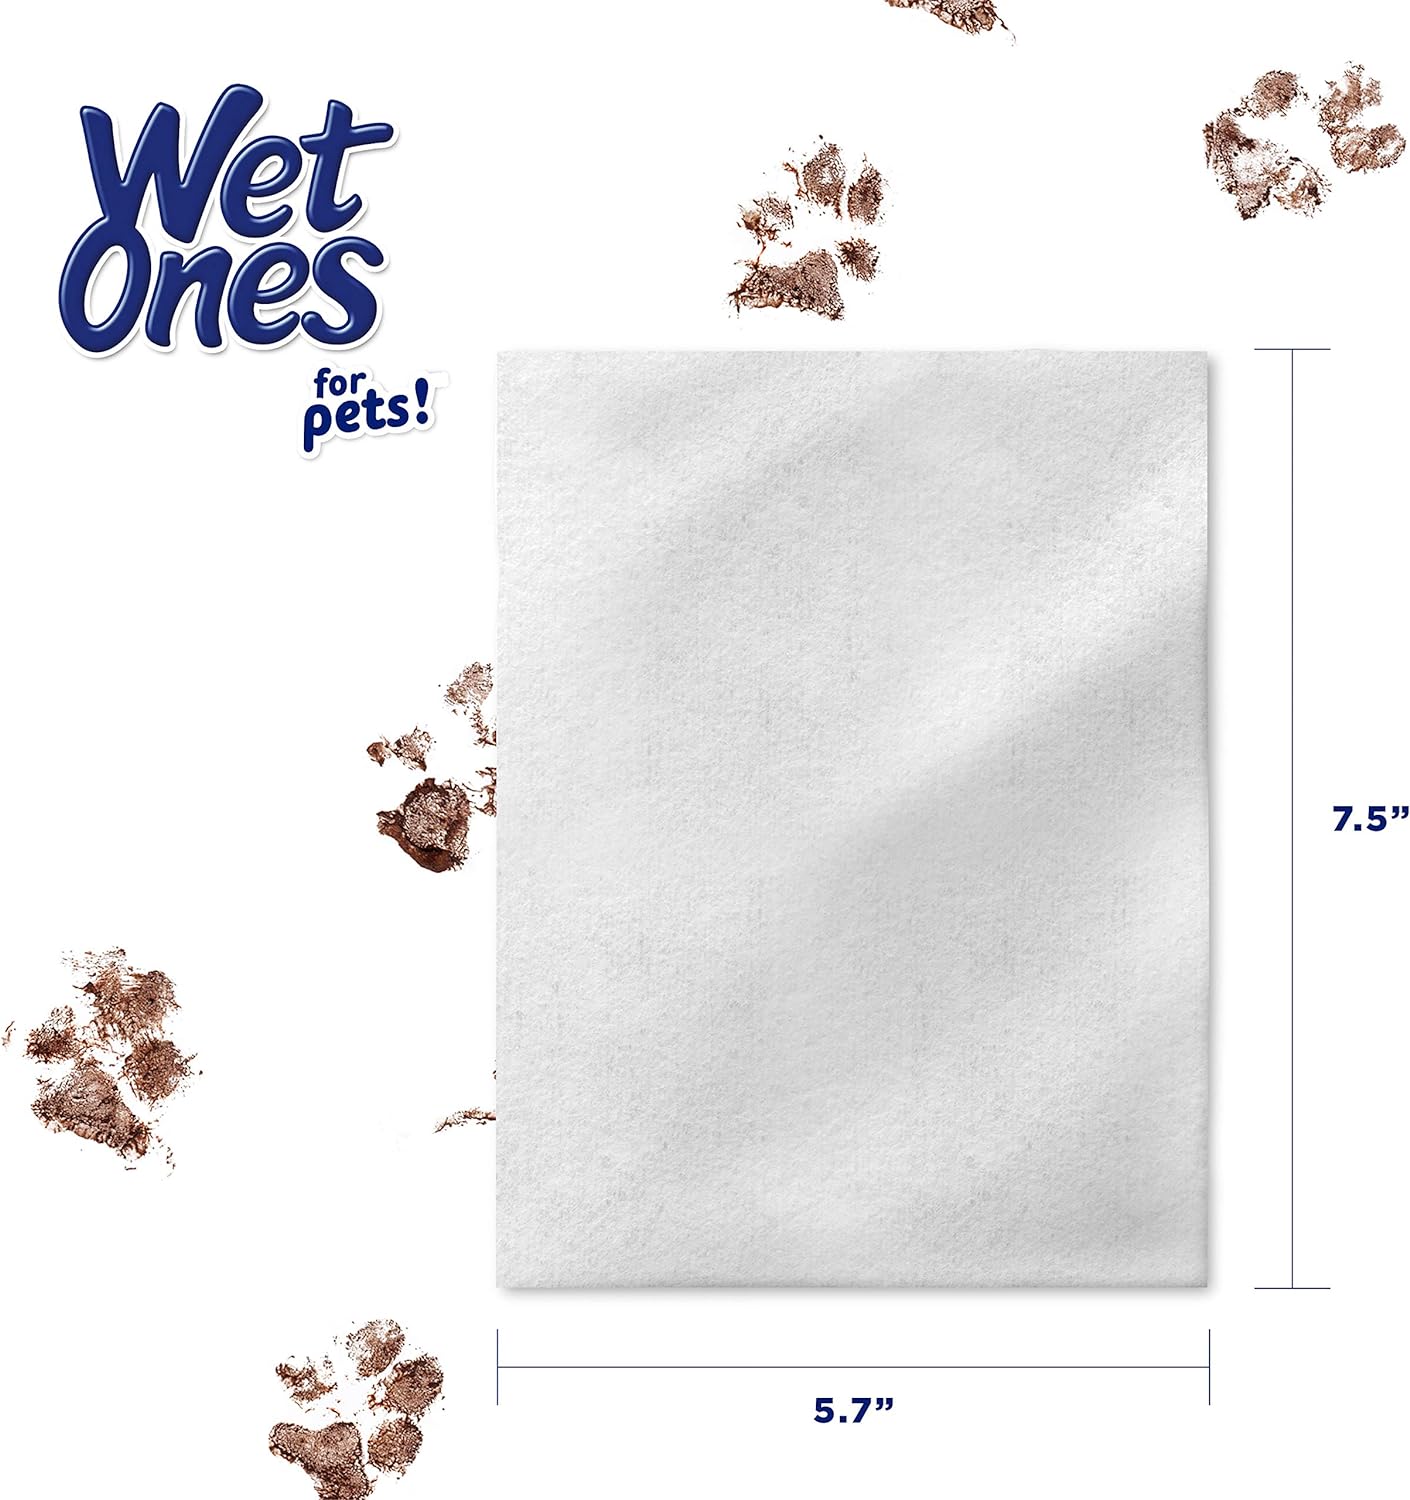 Wet Ones for Pets Freshening Multipurpose Wipes for Cats With Aloe Vera |Easy to Use Cat Cleaning Wipes, Freshening Cat Grooming Wipes for Pet Grooming in Fresh Scent|100 ct Pouch Cat Wipes|12-Pack : Movies & TV